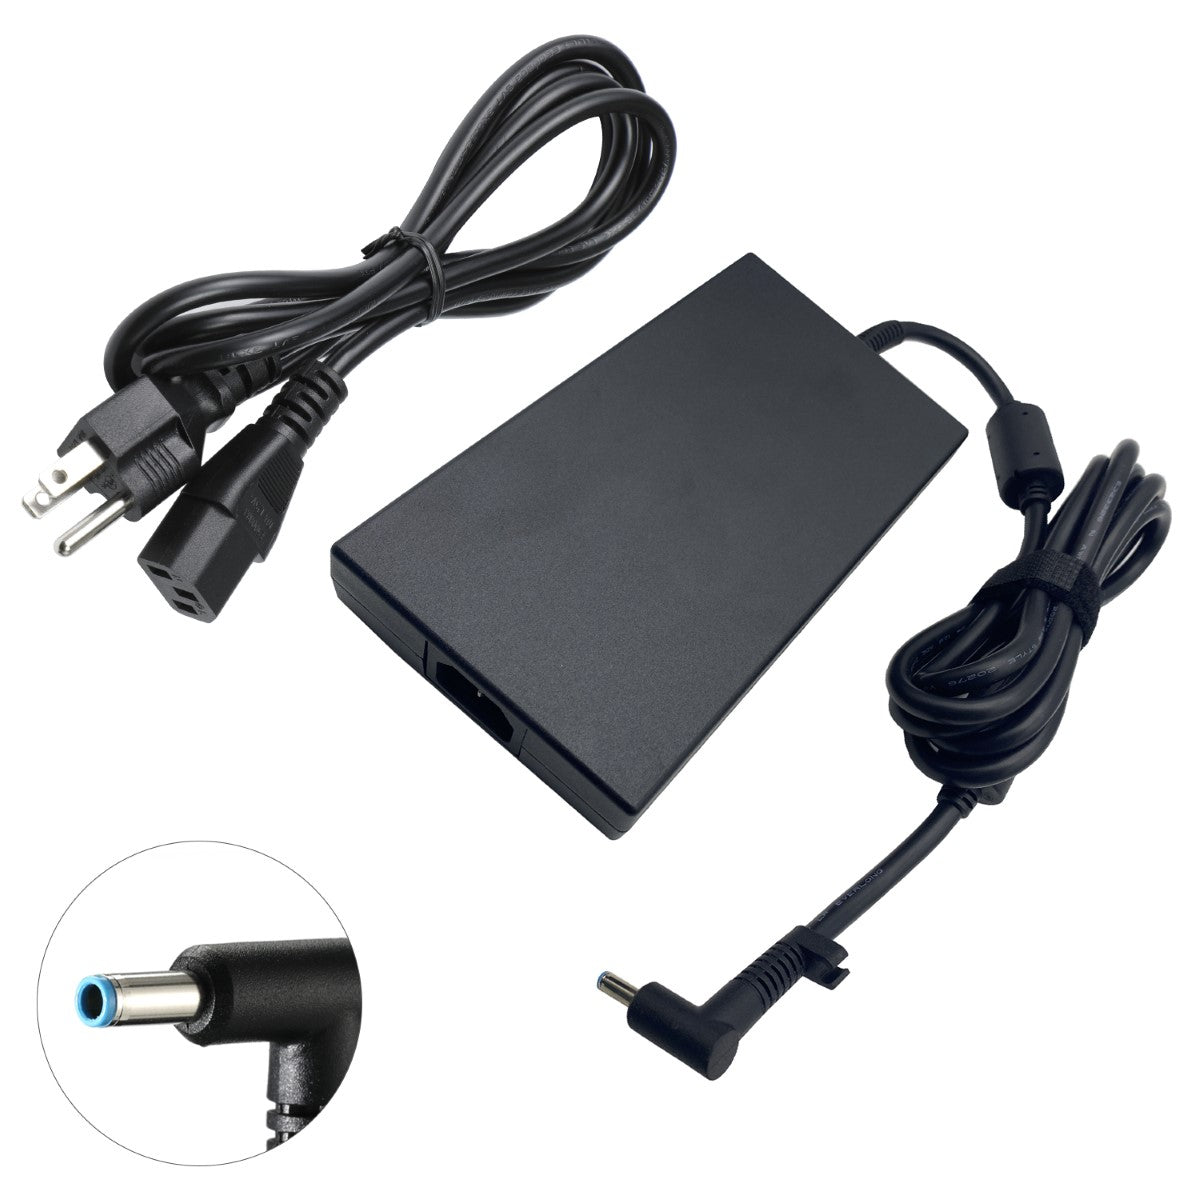 AC Adapter for HP Victus 15-fa0025nr Laptop